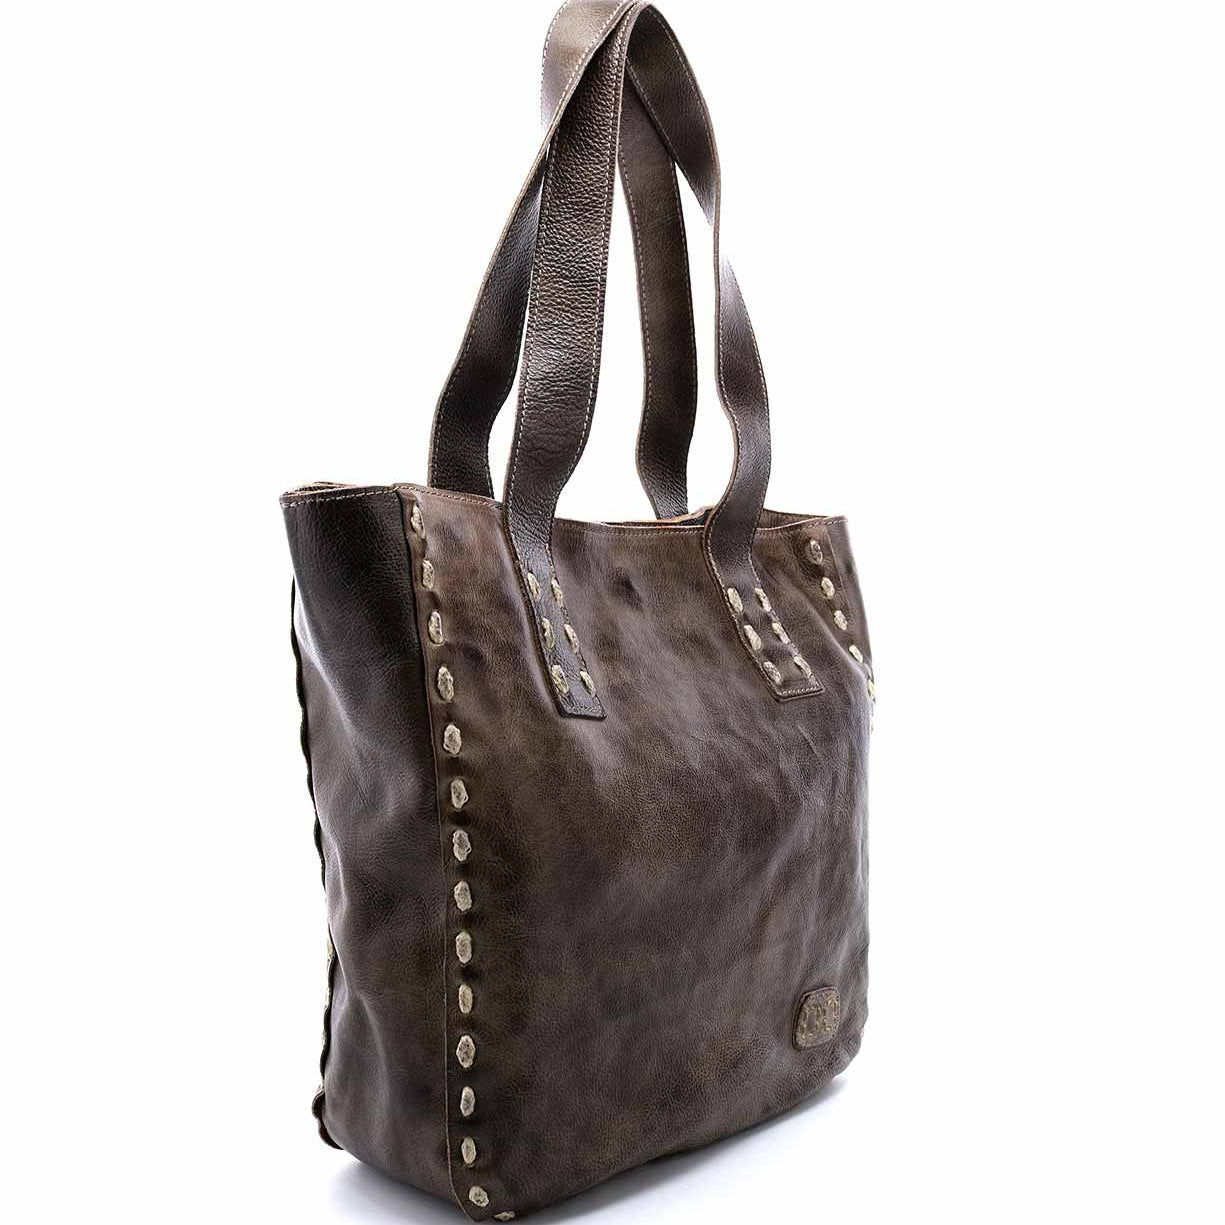 A brown leather Stevie tote bag with rivets by Bed Stu.